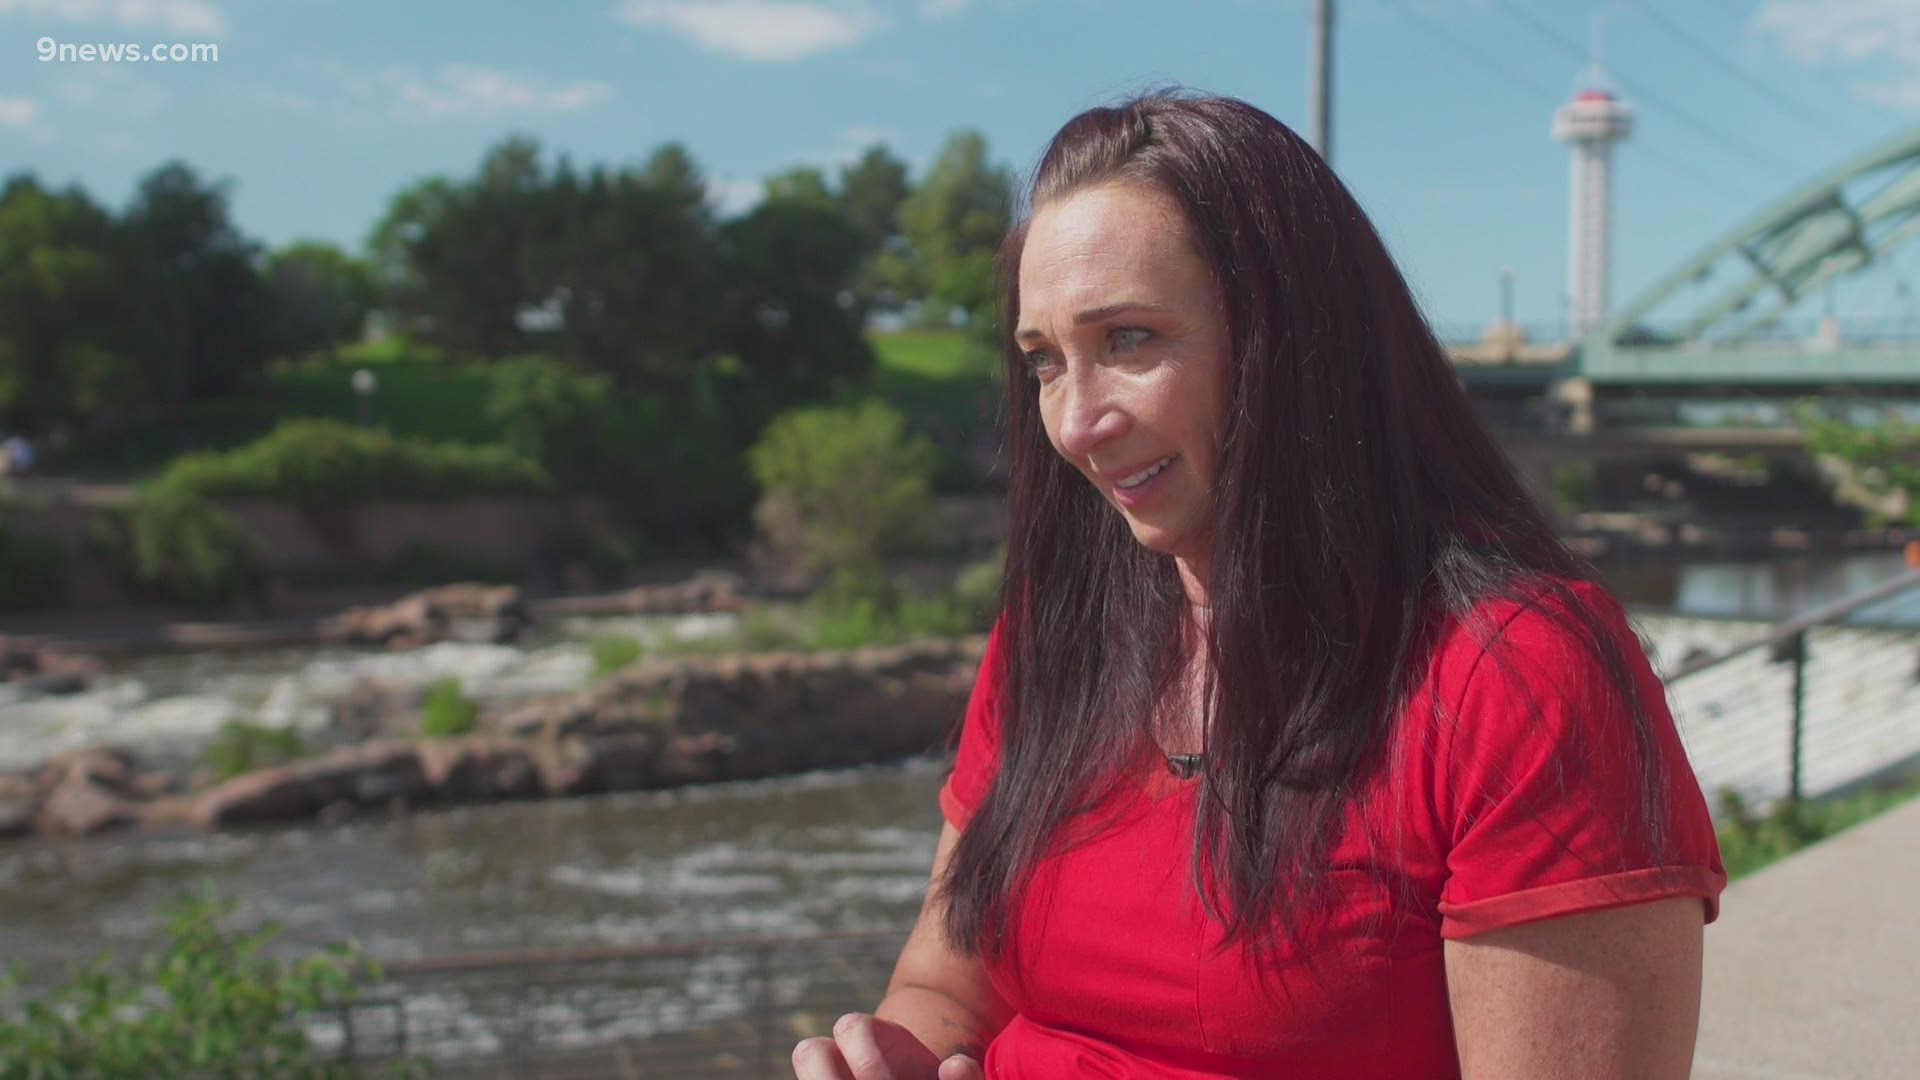 Six-time Olympic gold medalist Amy Van Dyken-Rouen's latest mission is being a champion for people with disabilities.